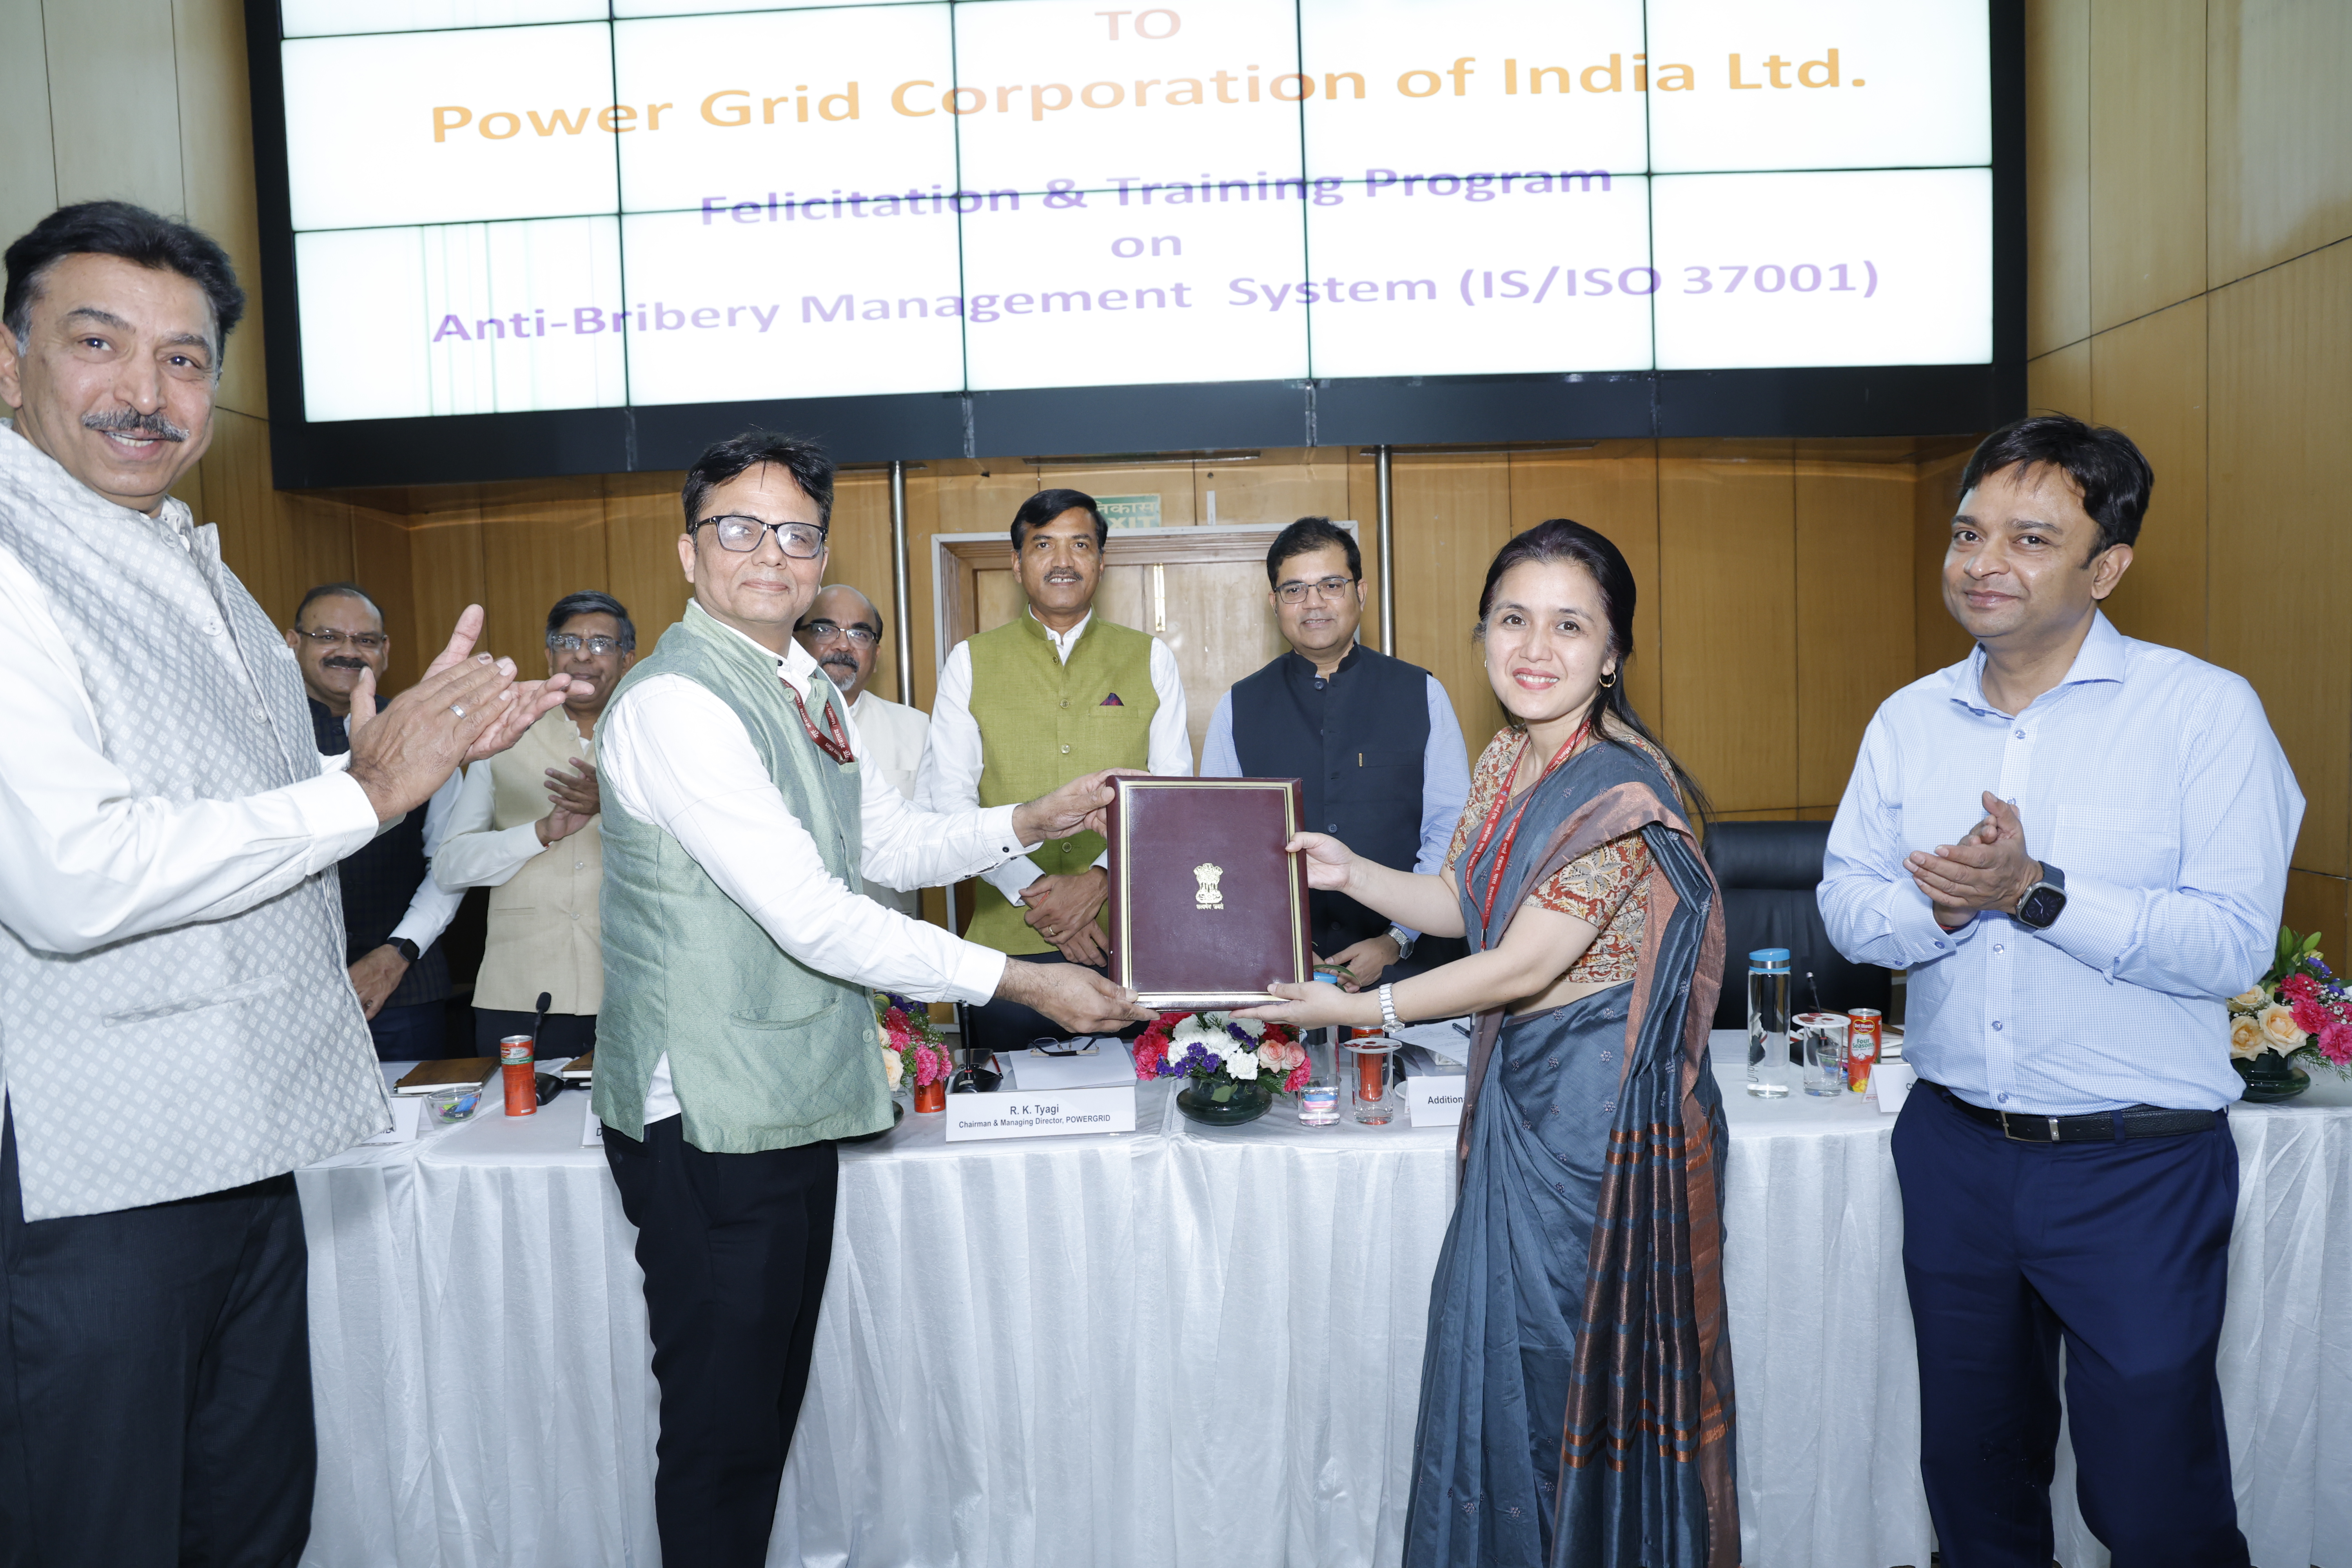 ANTI BRIBERY MANAGEMENT SYSTEM (ABMS) CERTIFICATION TO POWERGRID